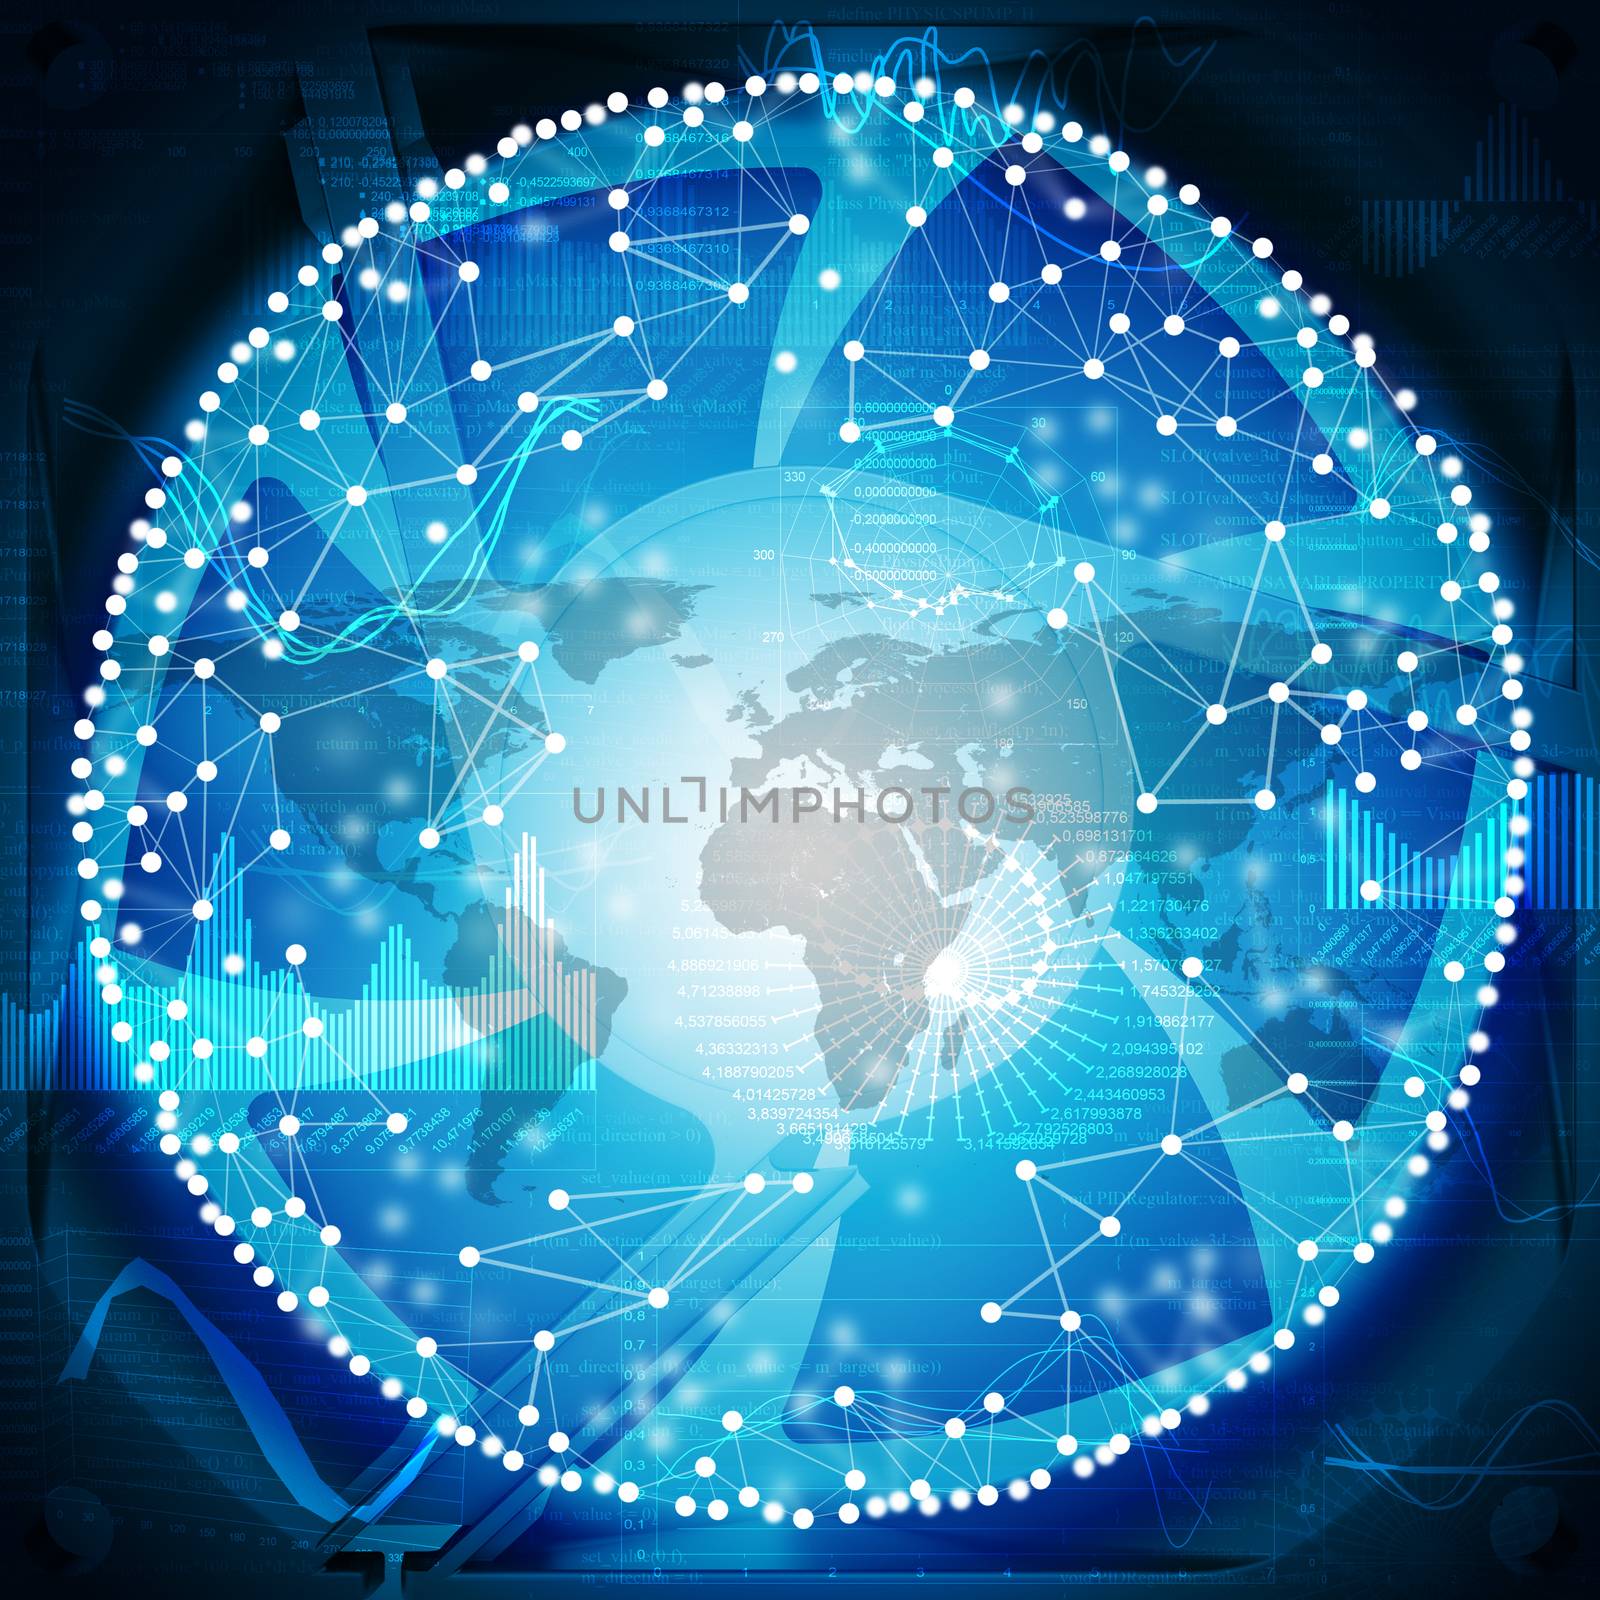 Connected bright dots on abstract blue background with world map and graphical charts